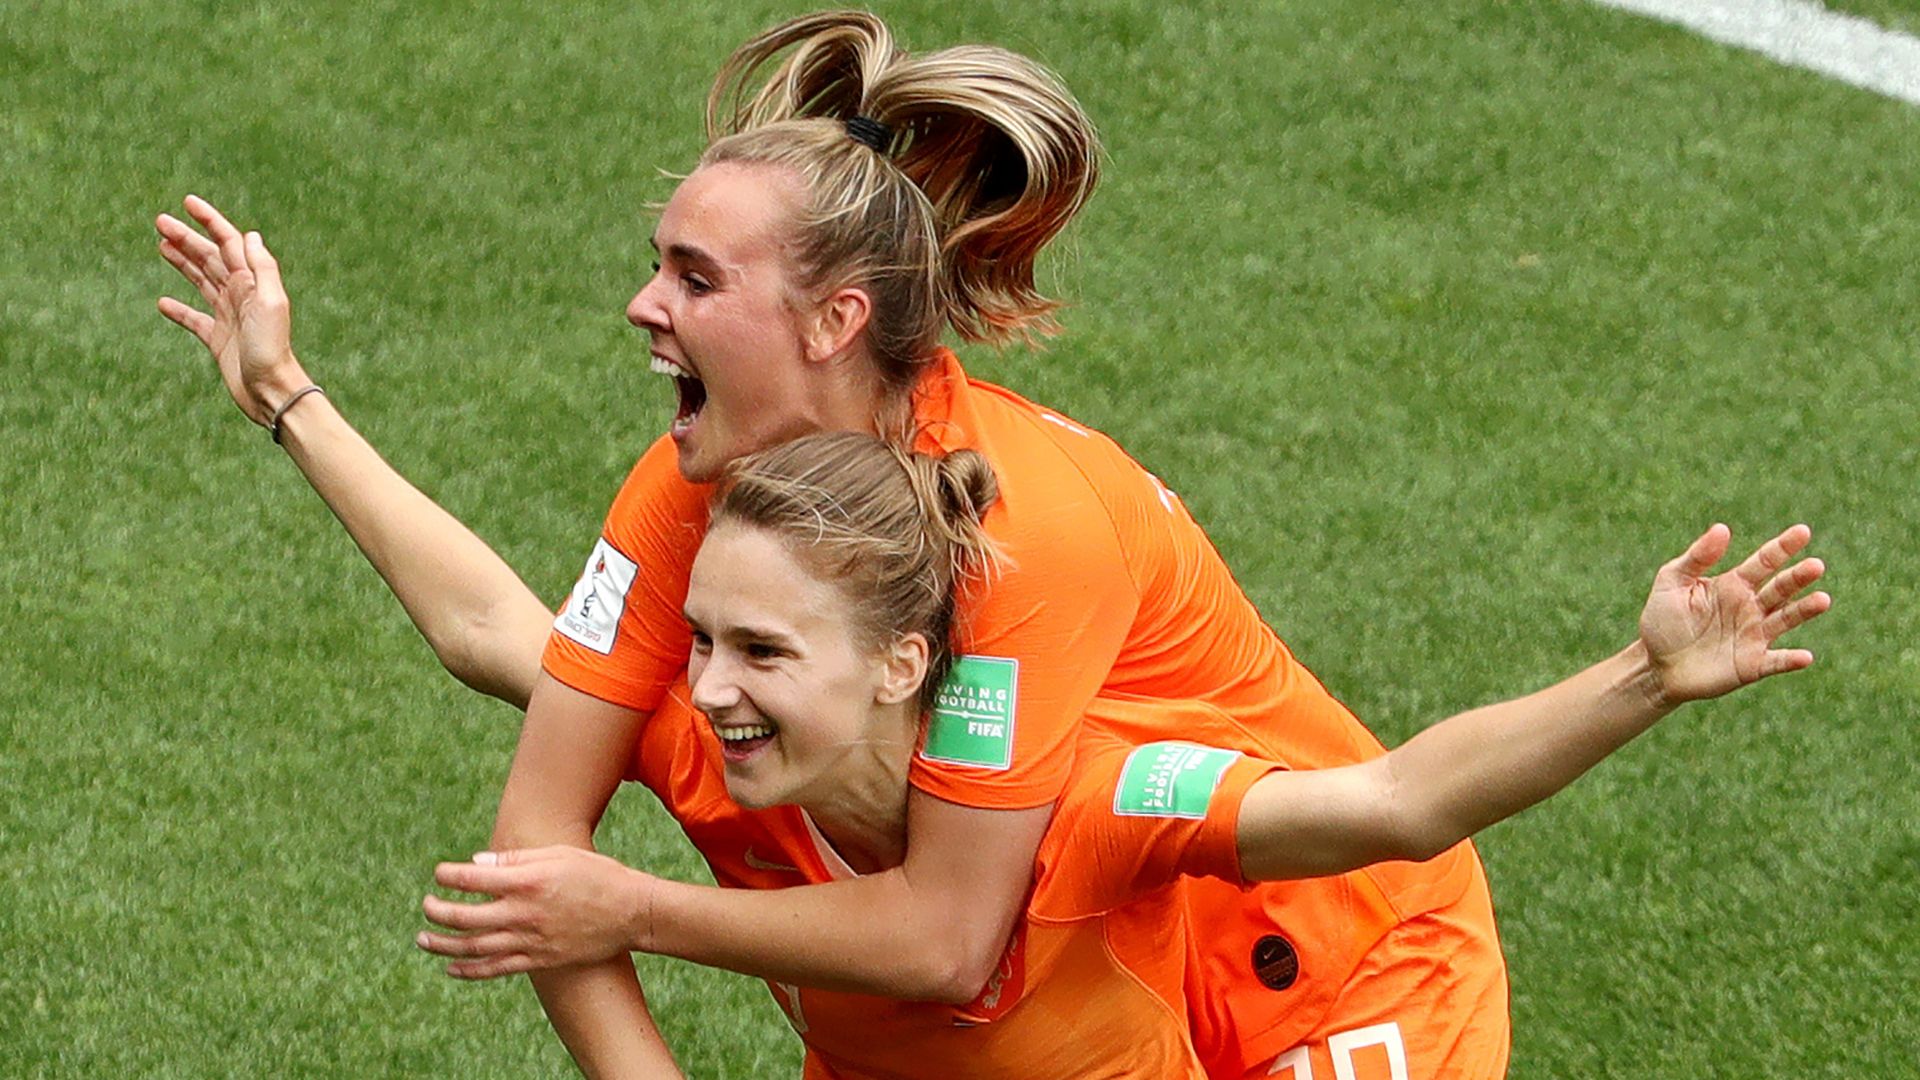 Women's World Cup 2019: Arsenal Star Vivianne Miedema Becomes Netherlands' All Time Leading Scorer At Just 22 Years Of Age